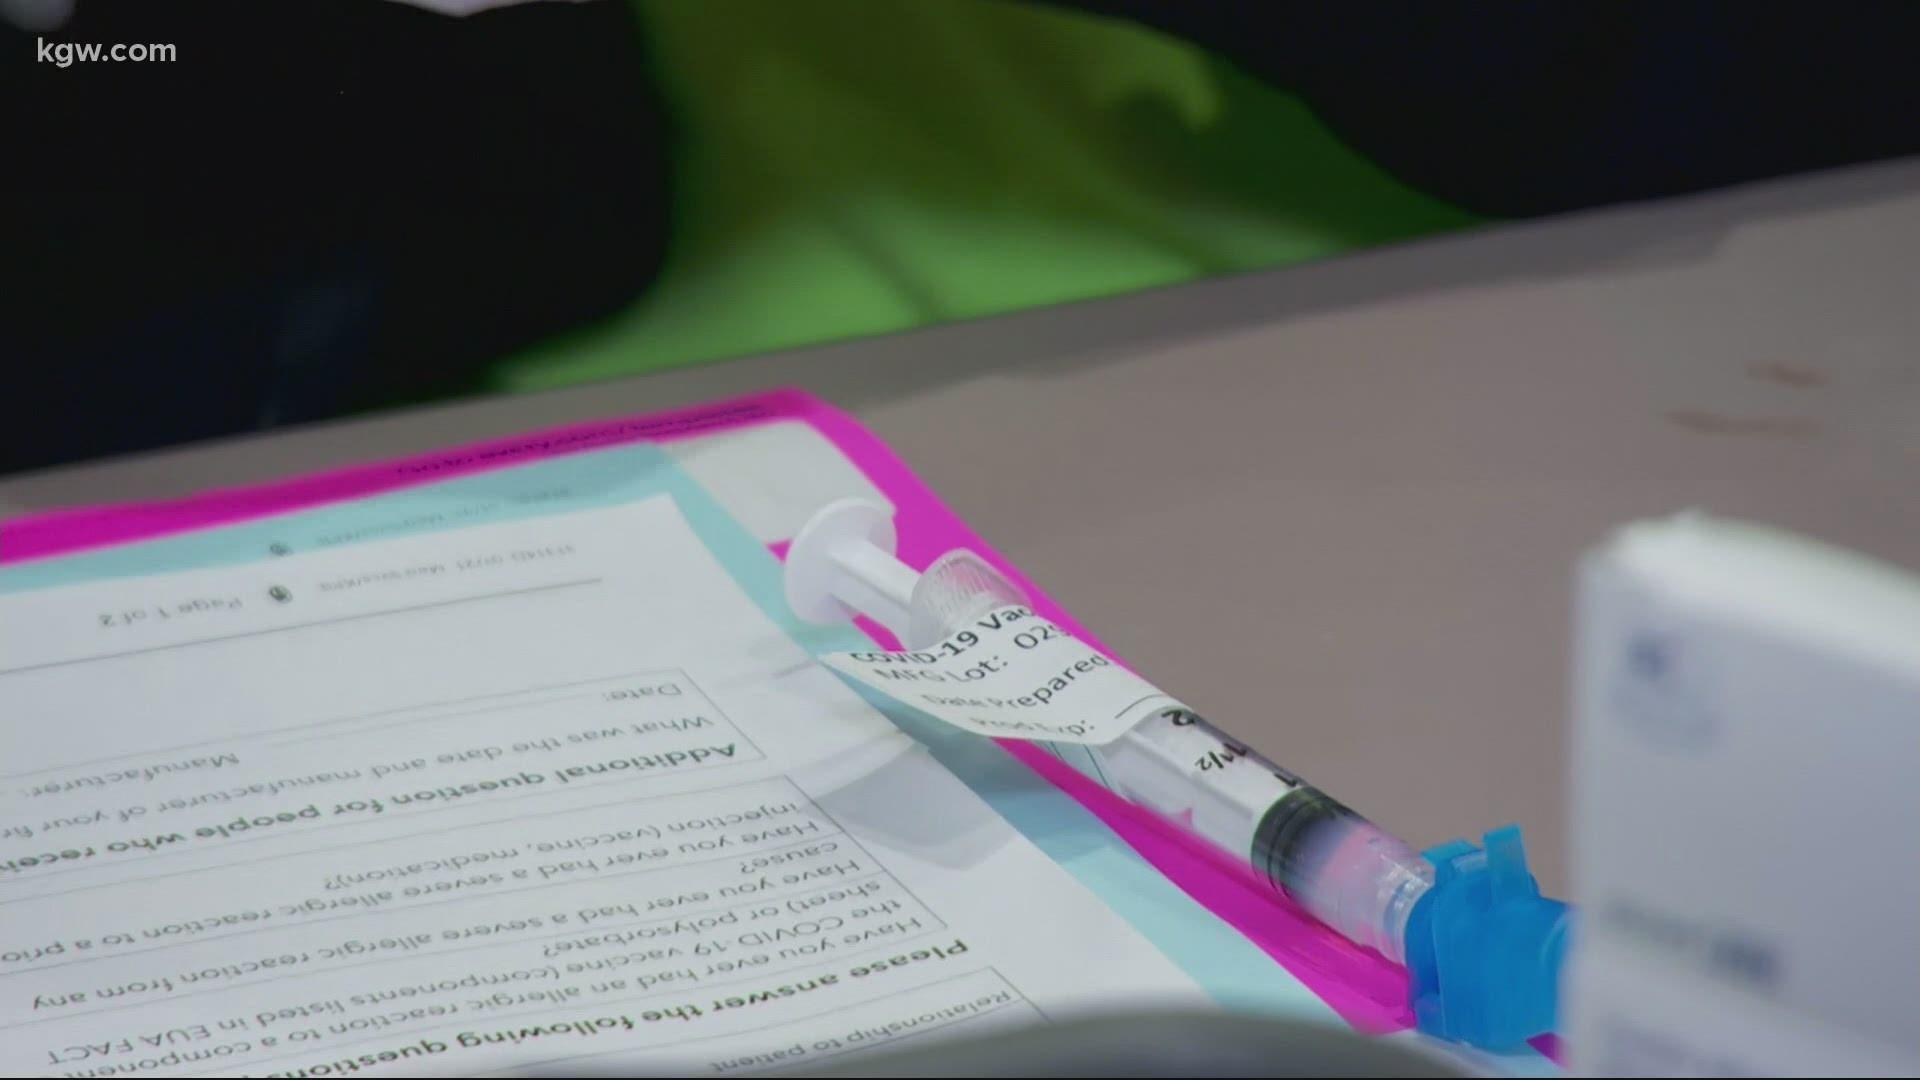 Oregonians 80 and older will soon be eligible for vaccines. But as Pat Dooris reports, right now many of them can’t even sign up for appointments.